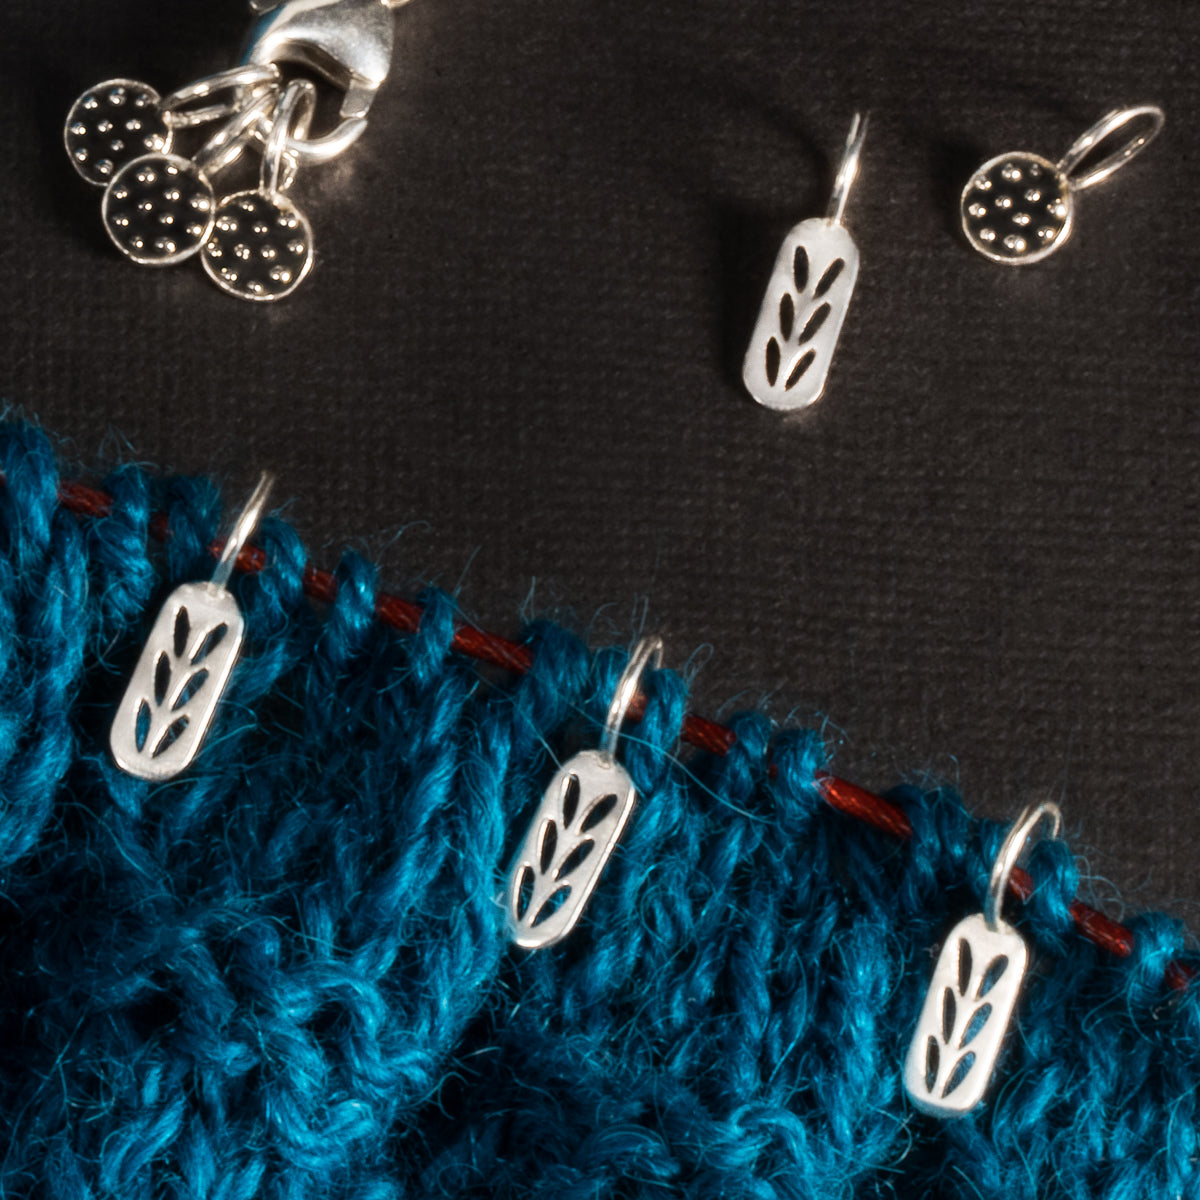 2019 Best Gifts for Knitters - Sterling Stitch Marker Necklace